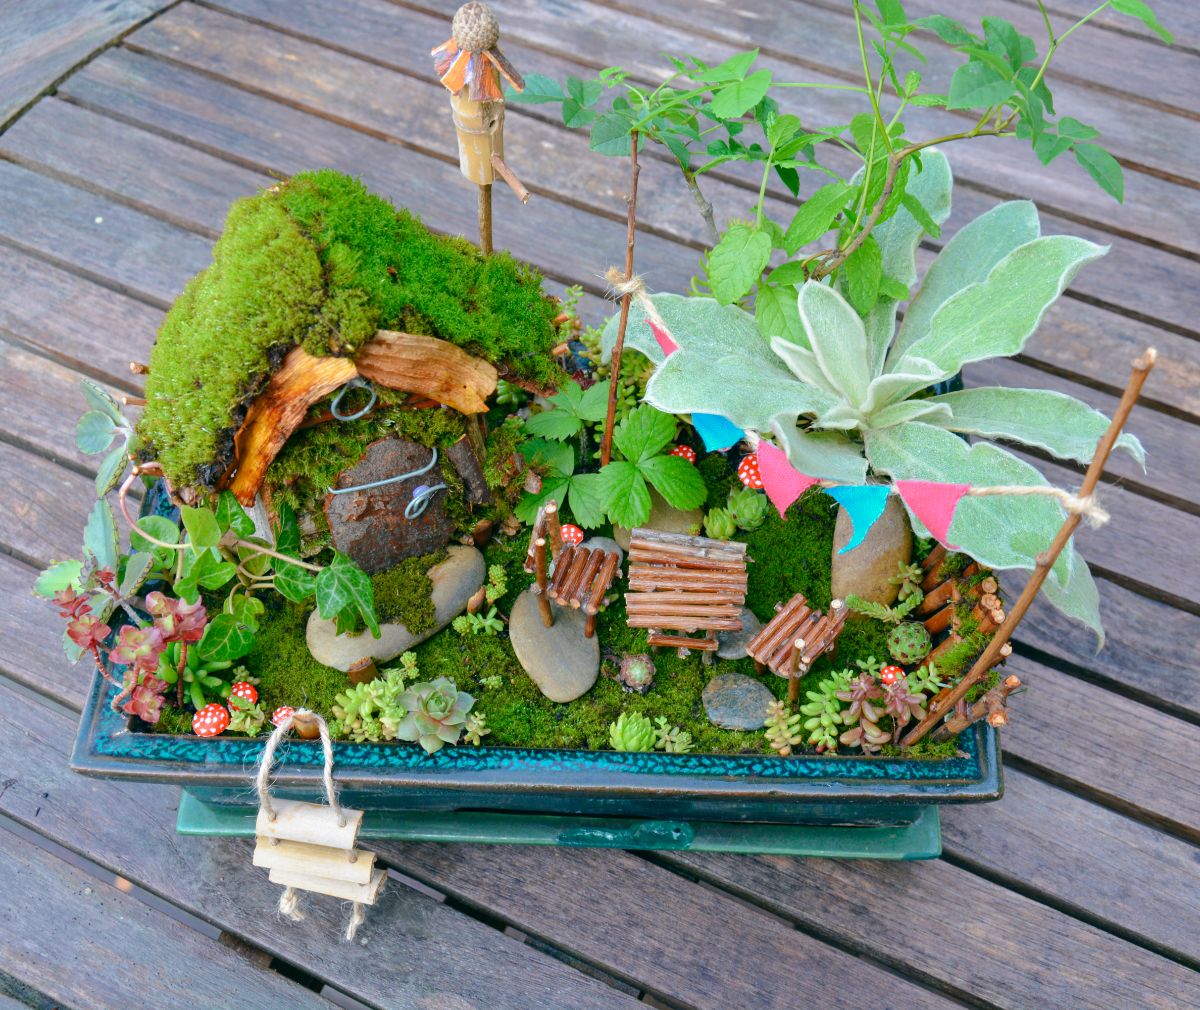 A fairy garden created with a variety of small plants